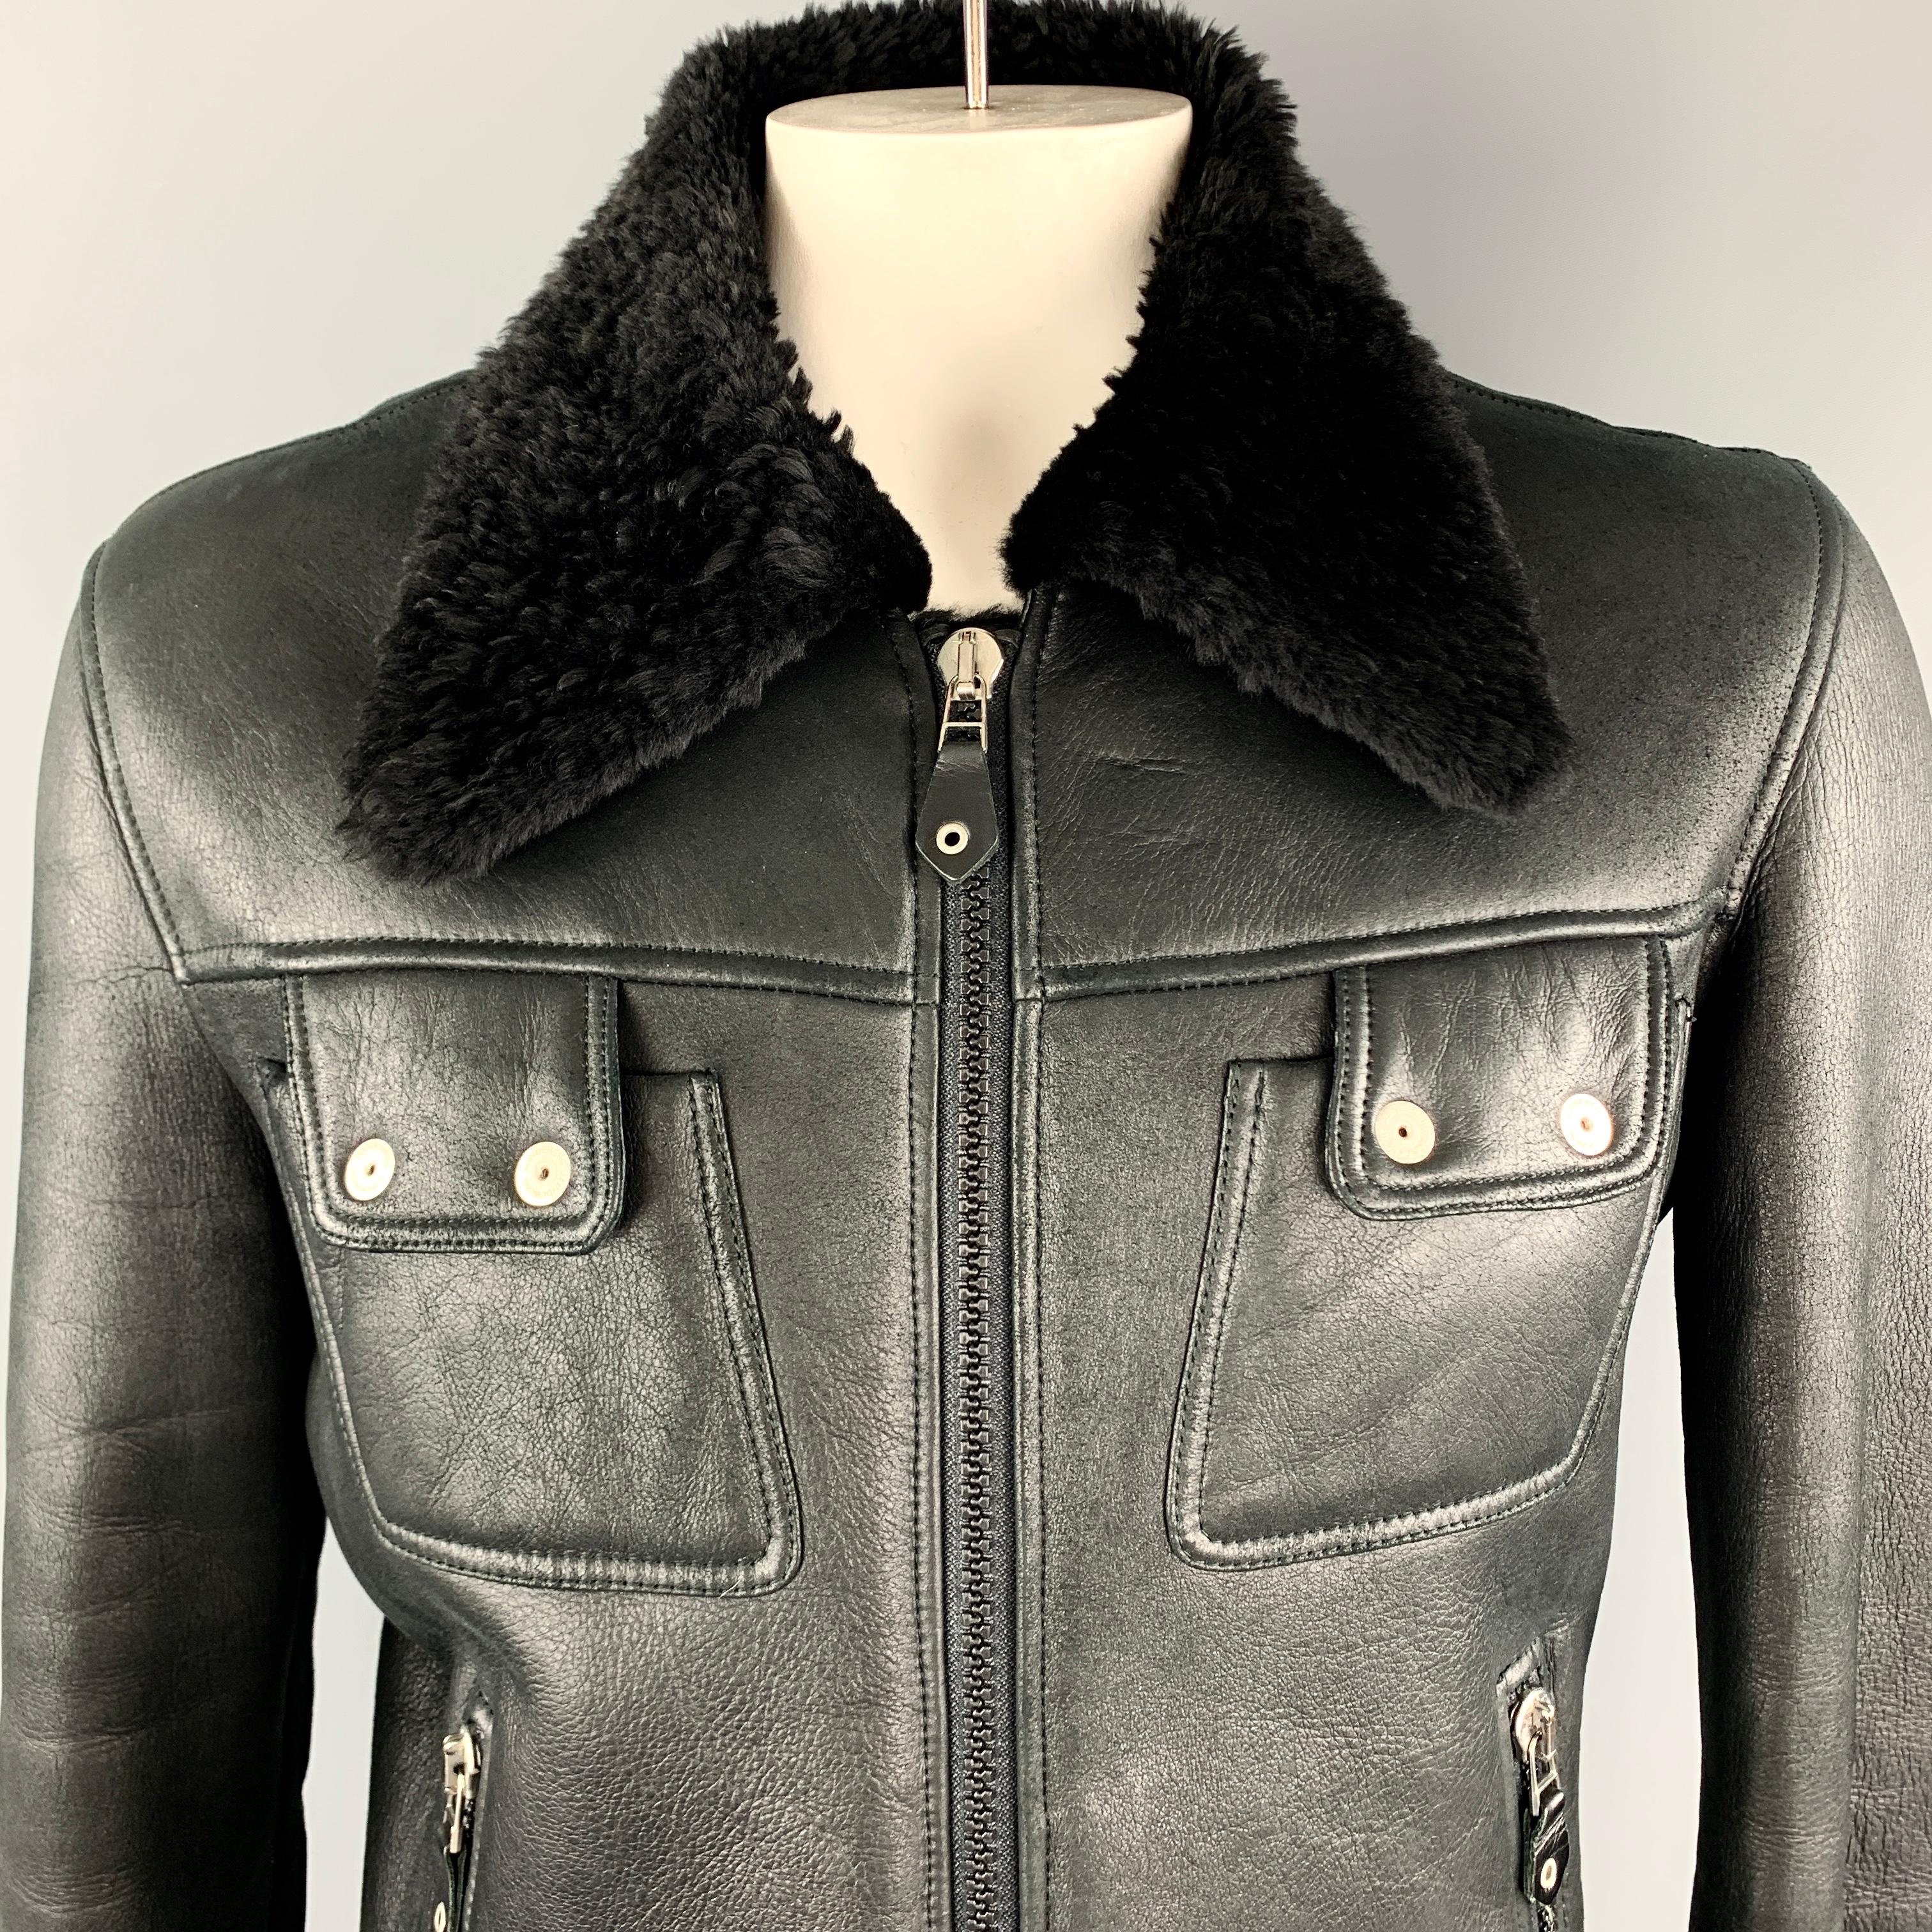 J LINDEBERG Jacket comes in a black shearling leather with a fur pointed collar, double zip front, patch snap pockets, dual slanted zip pockets zip cuffs with tab, and patchwork back.

Excellent Pre-Owned Condition.
Marked: